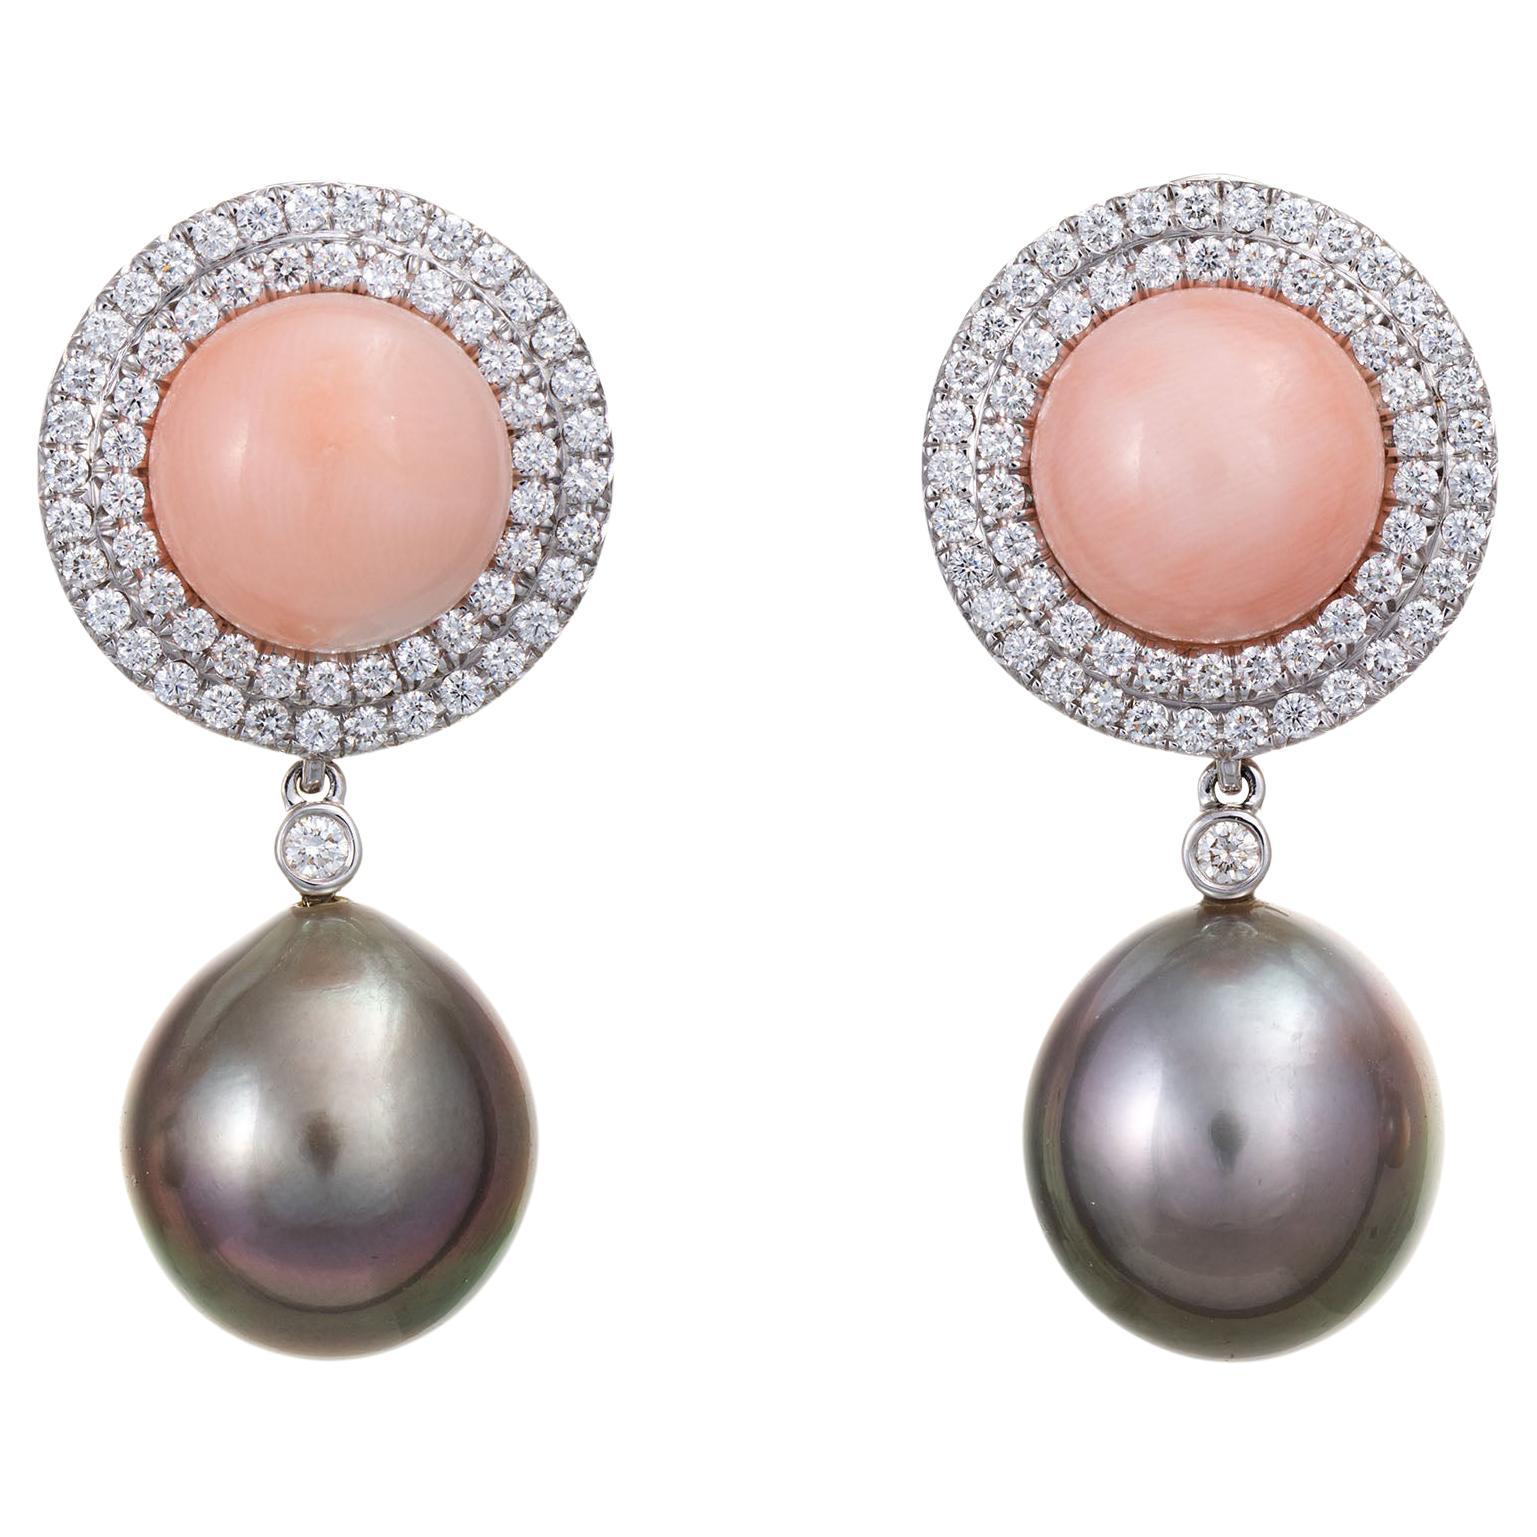 Assael Coral Diamond Earrings Tahitian South Sea Pearls Estate 18k White Gold For Sale